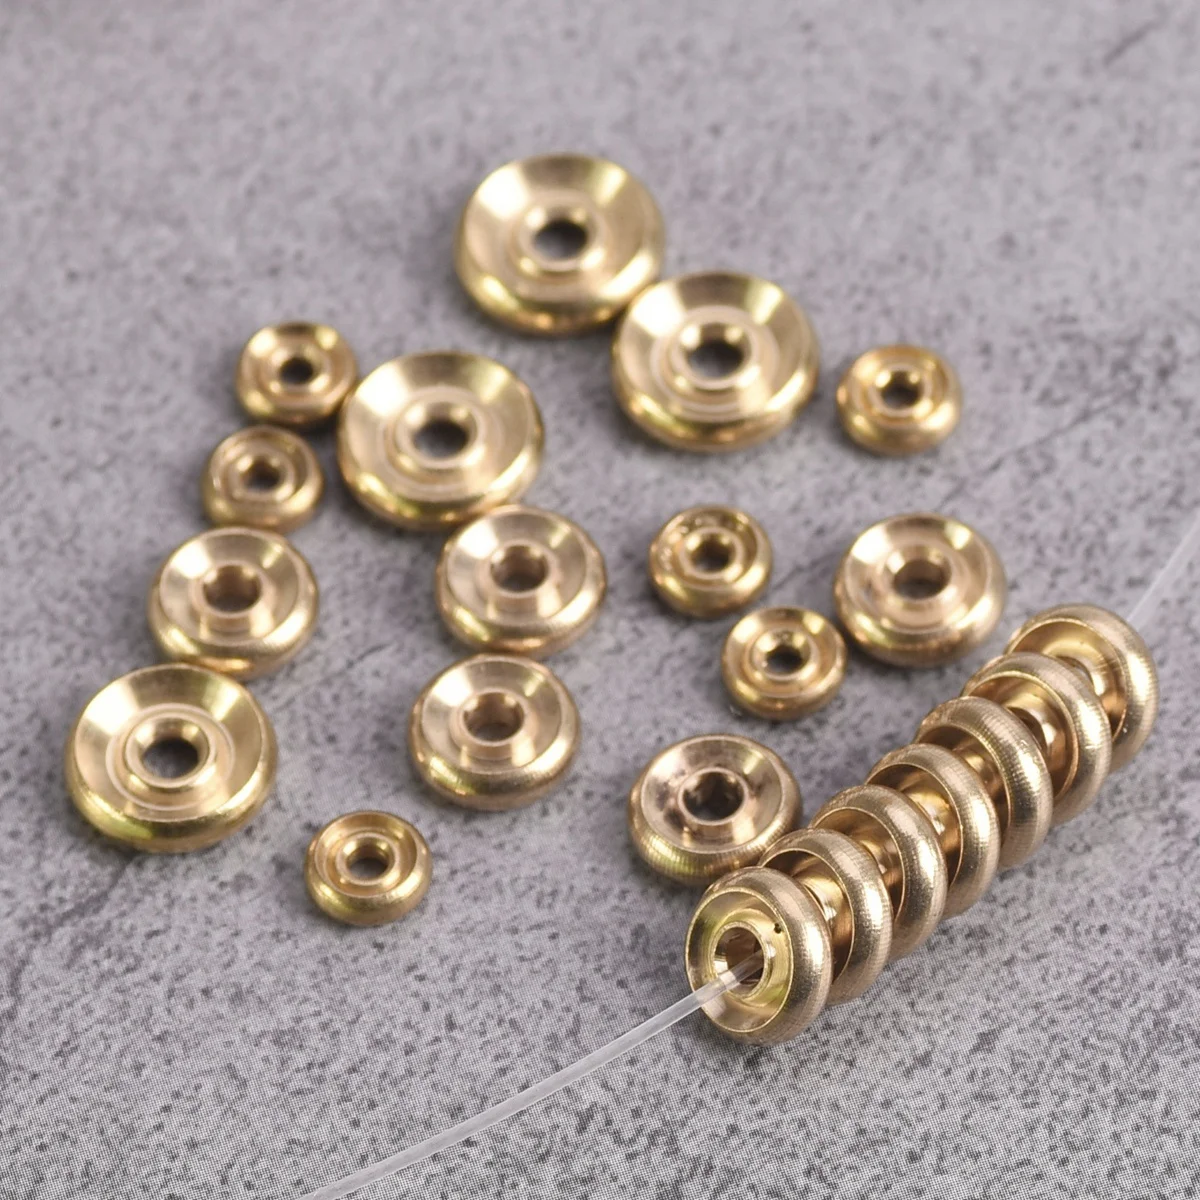 30pcs Flat Round Rondelle 6mm 8mm 10mm Solid Brass Metal Light Gold Color Loose Spacer Beads lot for Jewelry Making Findings eb alto saxophone brass lacquered gold e flat sax